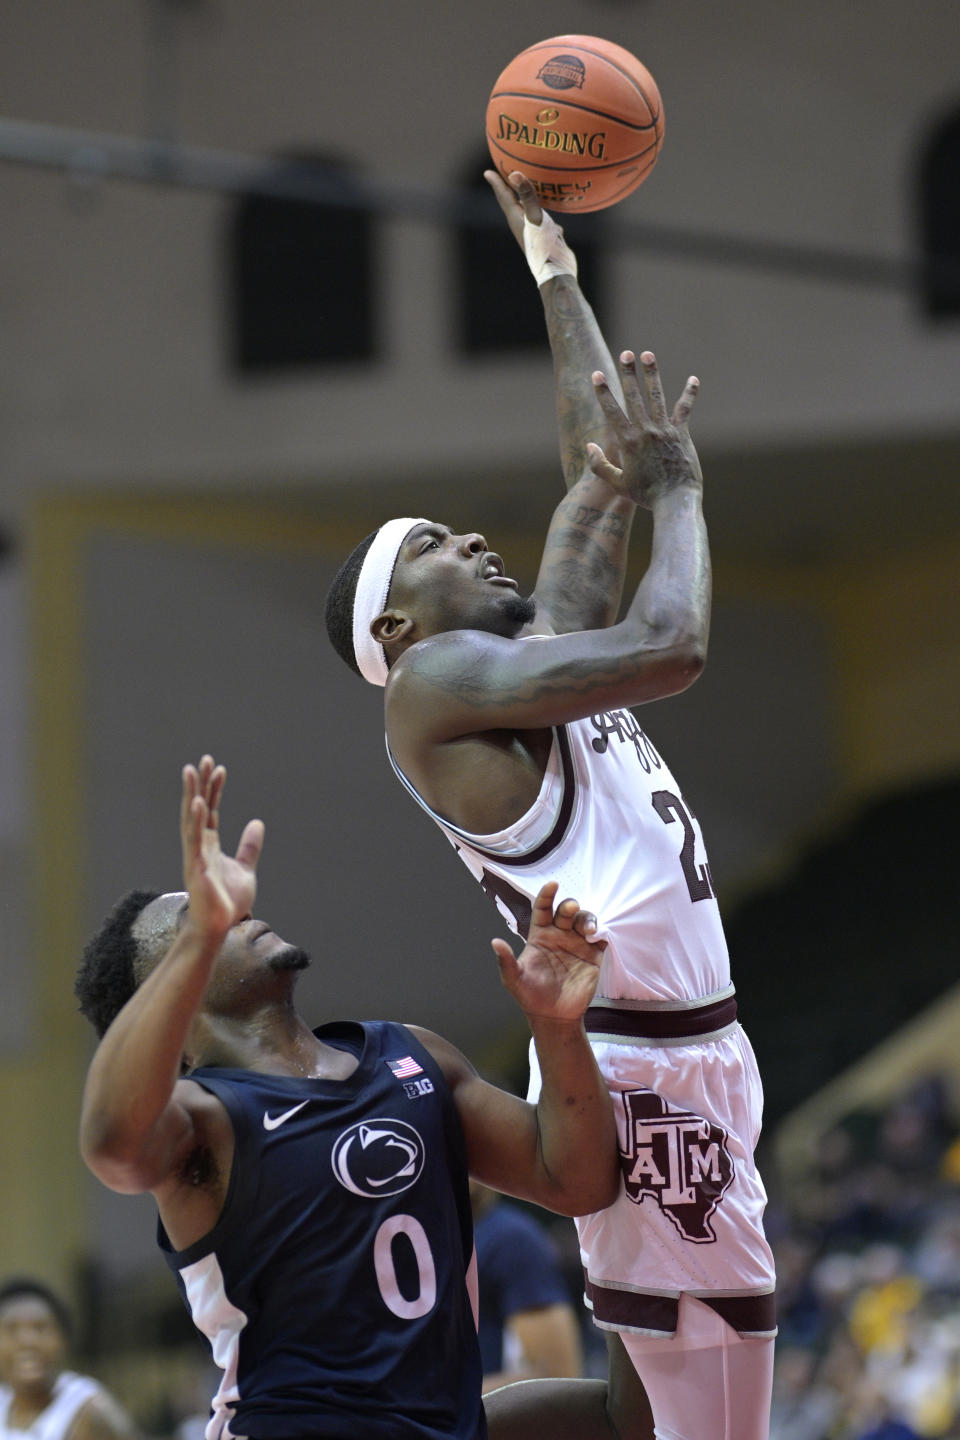 Texas A&M guard Tyrece Radford, right, shoots in front of Penn State guard Kanye Clary (0) during the second half of an NCAA college basketball game, Thursday, Nov. 23, 2023, in Kissimmee, Fla. (AP Photo/Phelan M. Ebenhack)